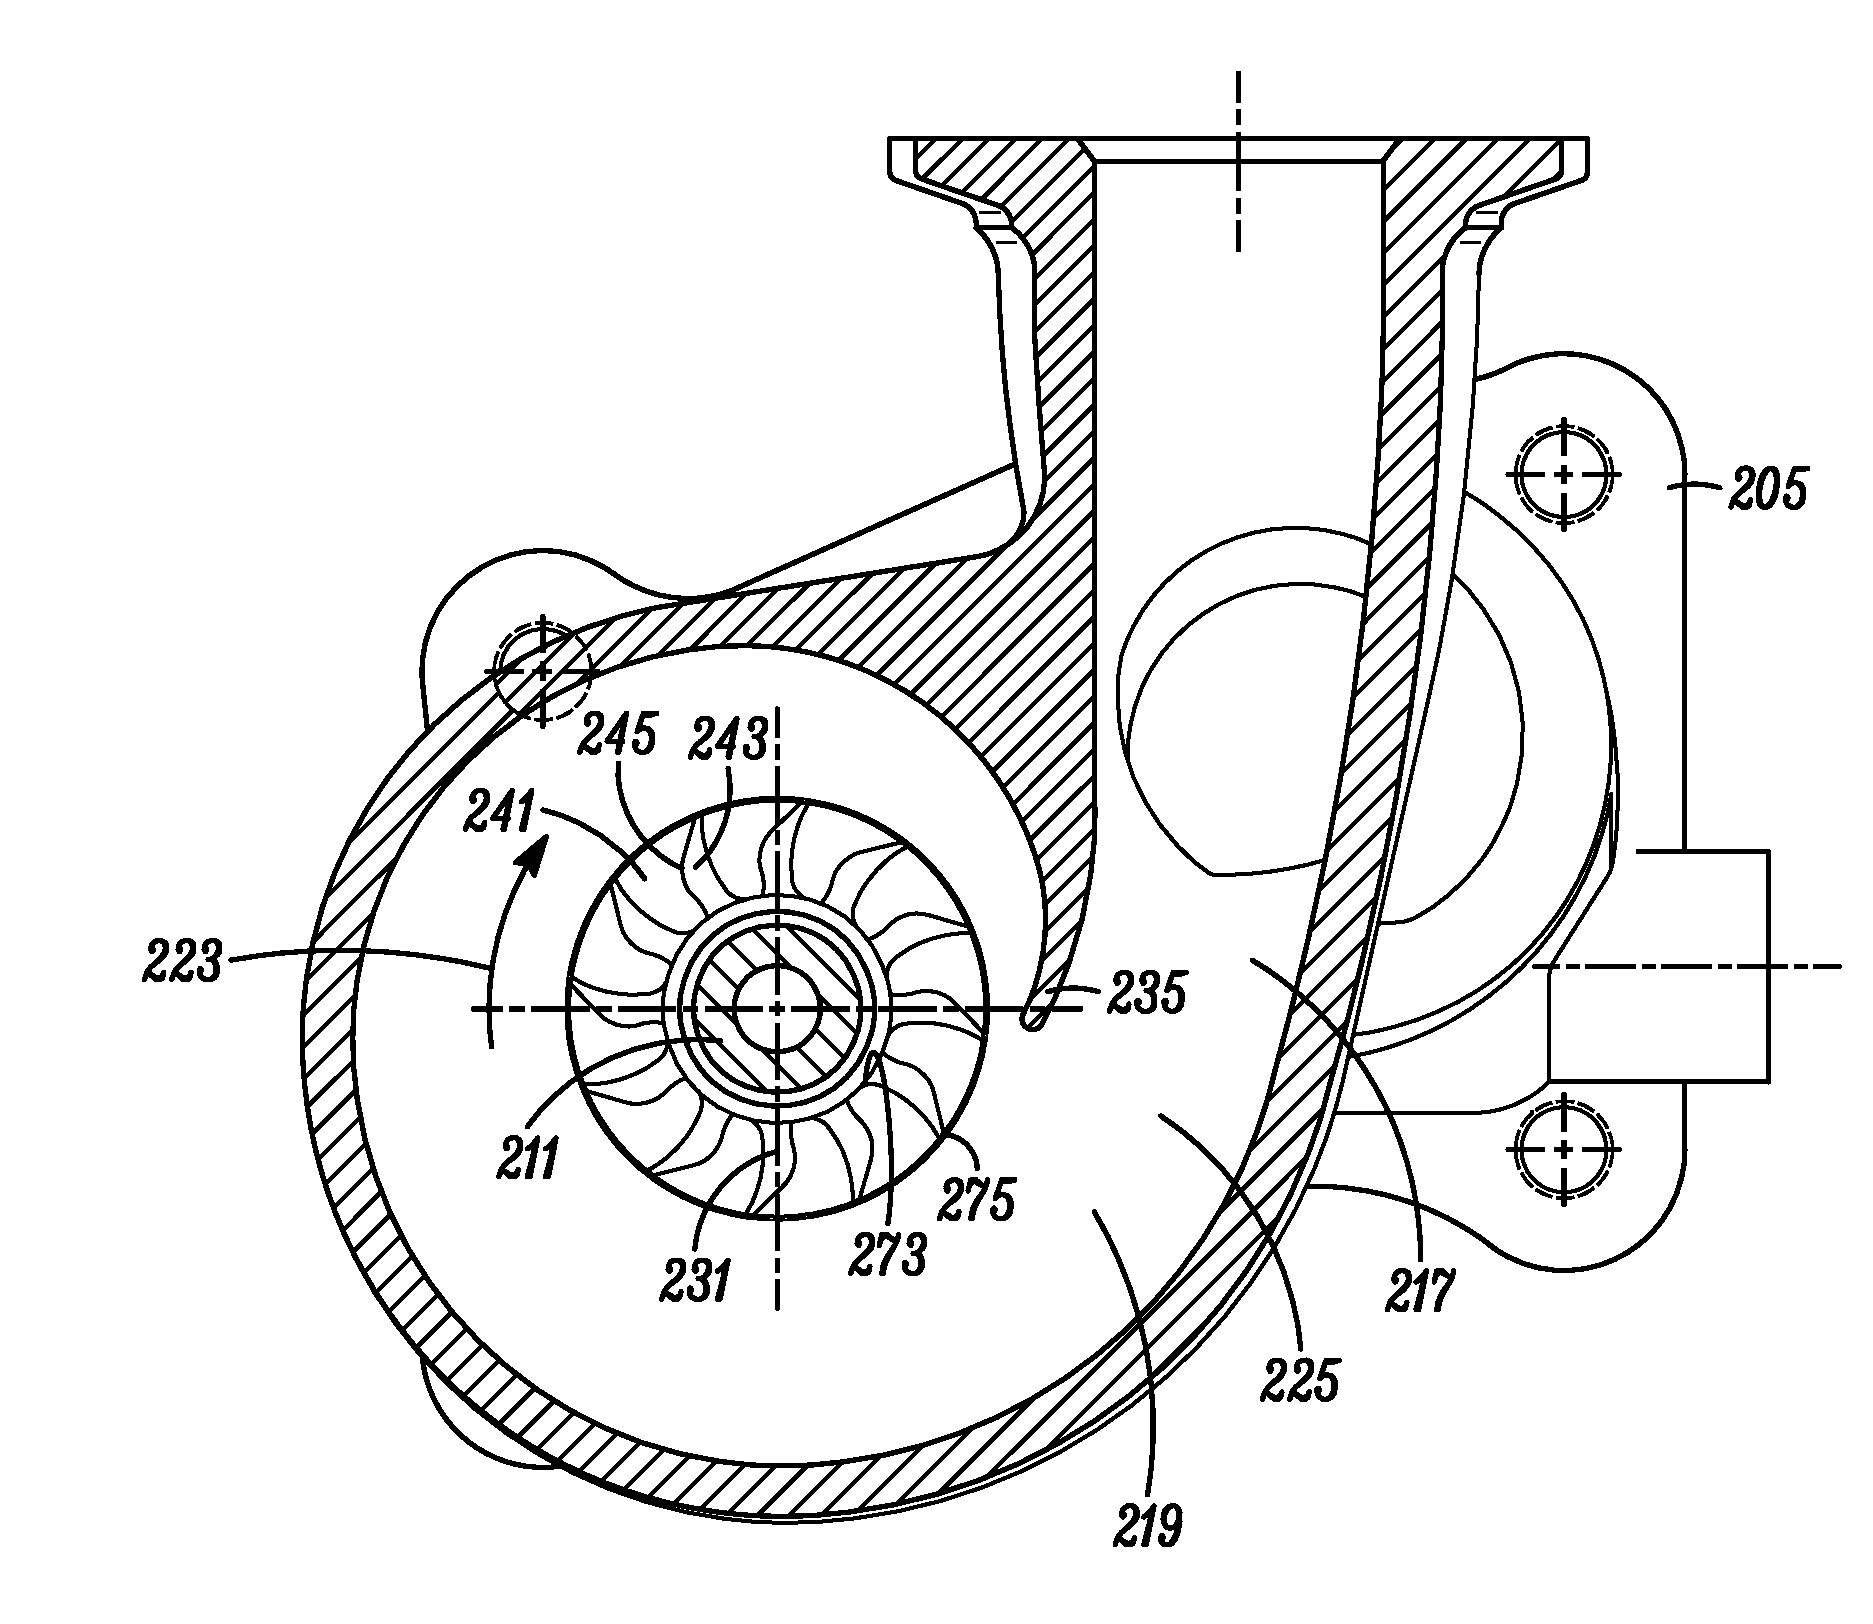 Axial turbine wheel with curved leading edge